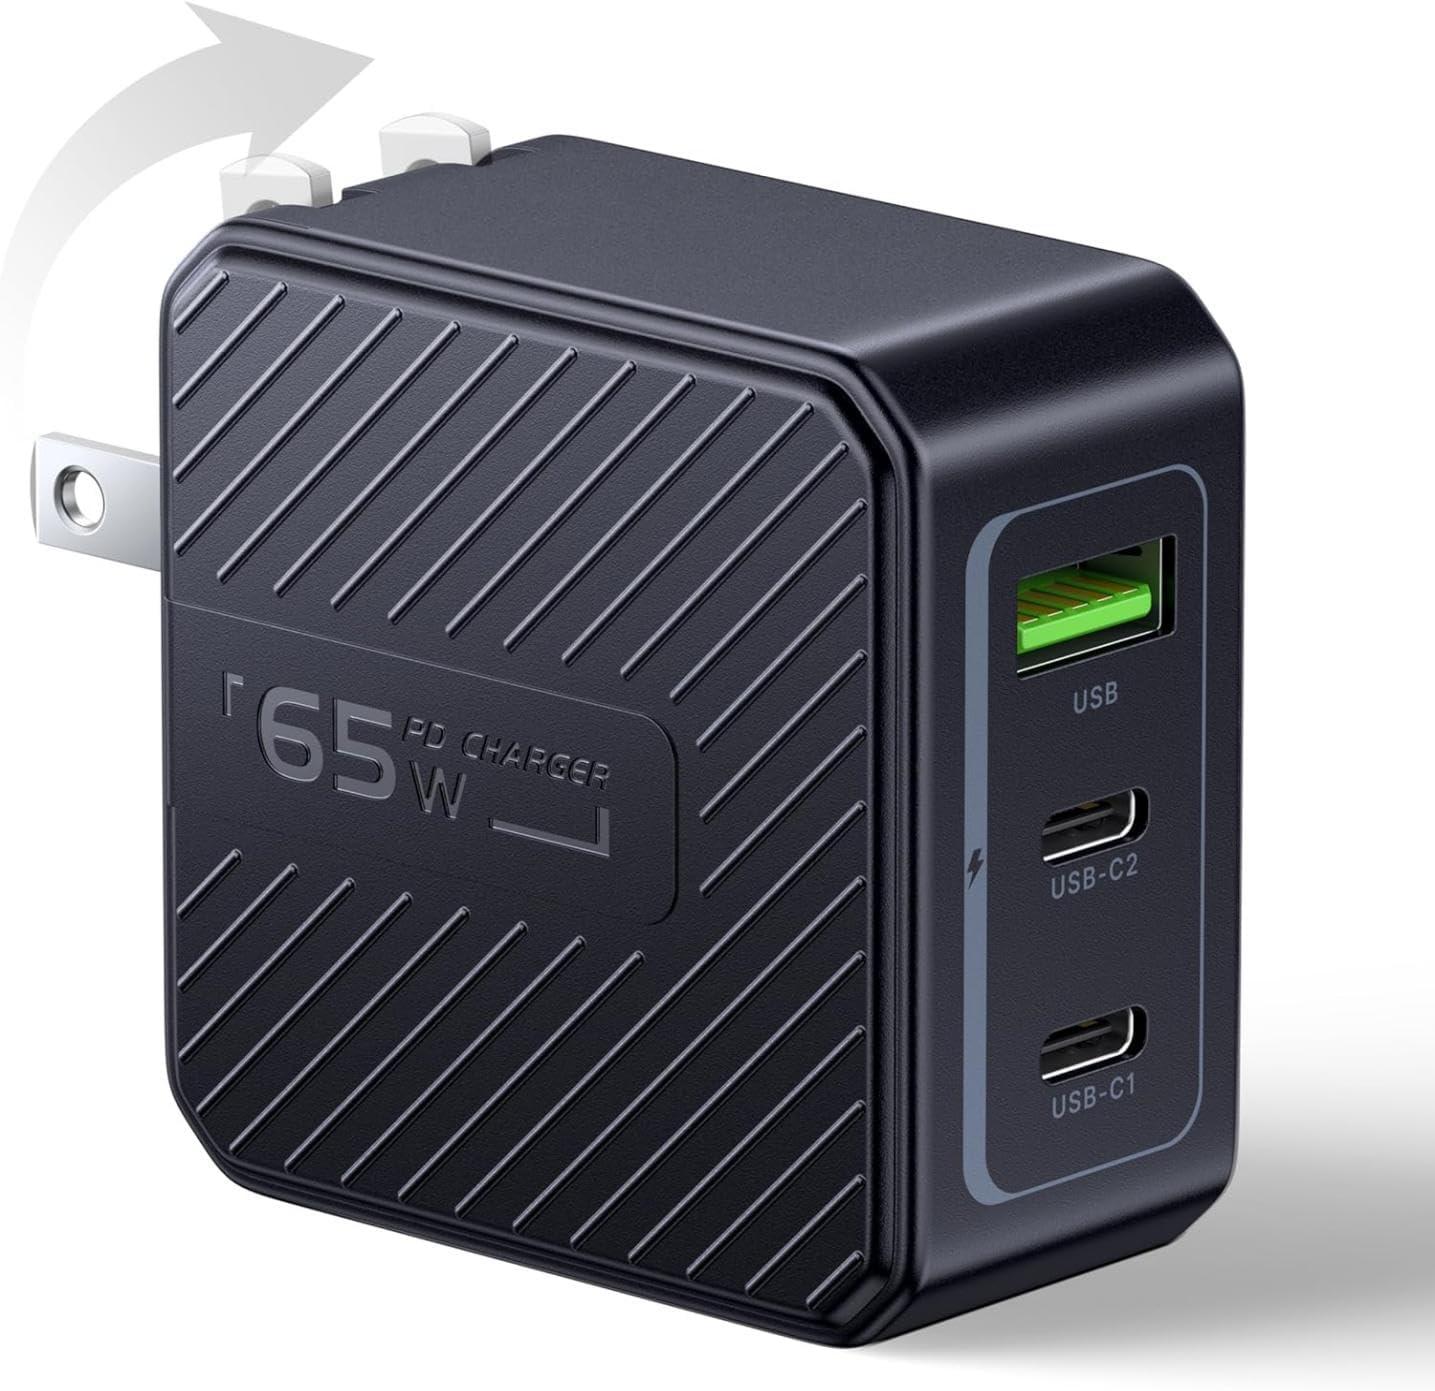 Aione 65W USB C Wall Charger Block for $8.99